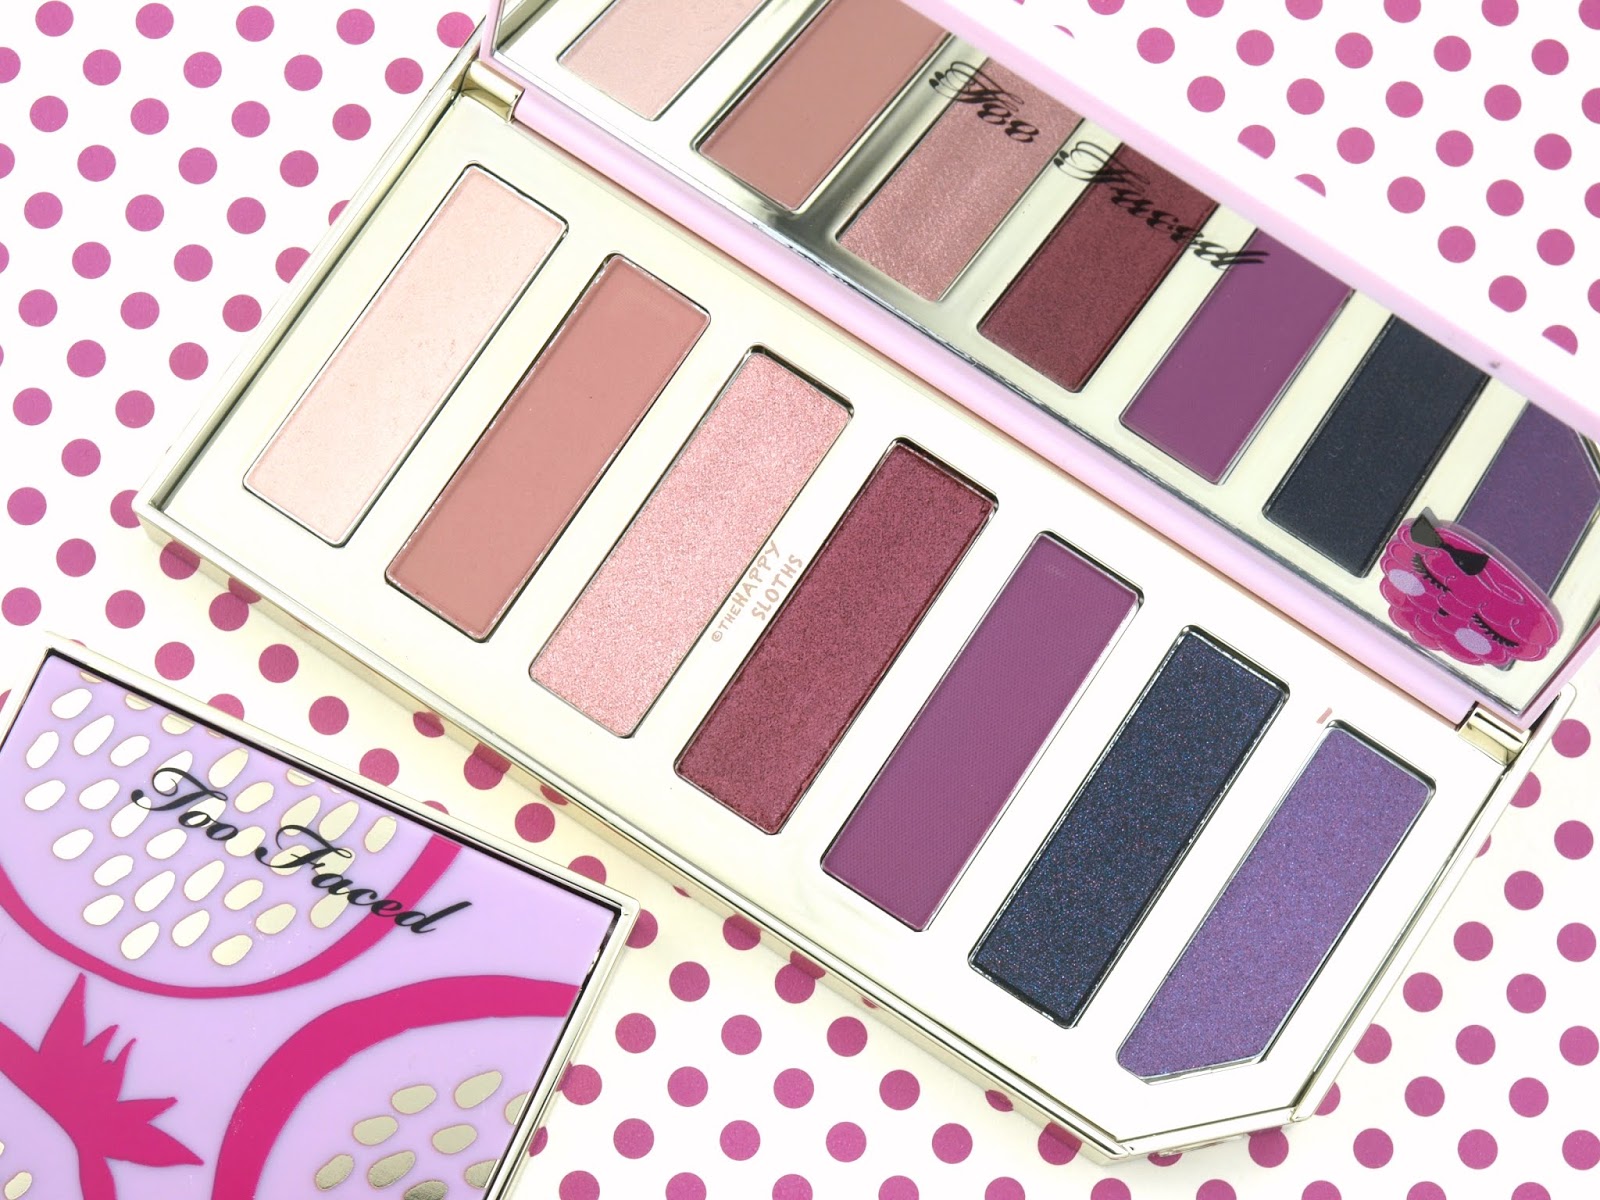 Too Faced Tutti Frutti Collection | Razzle Dazzle Berry Eyeshadow Palette: Review and Swatches